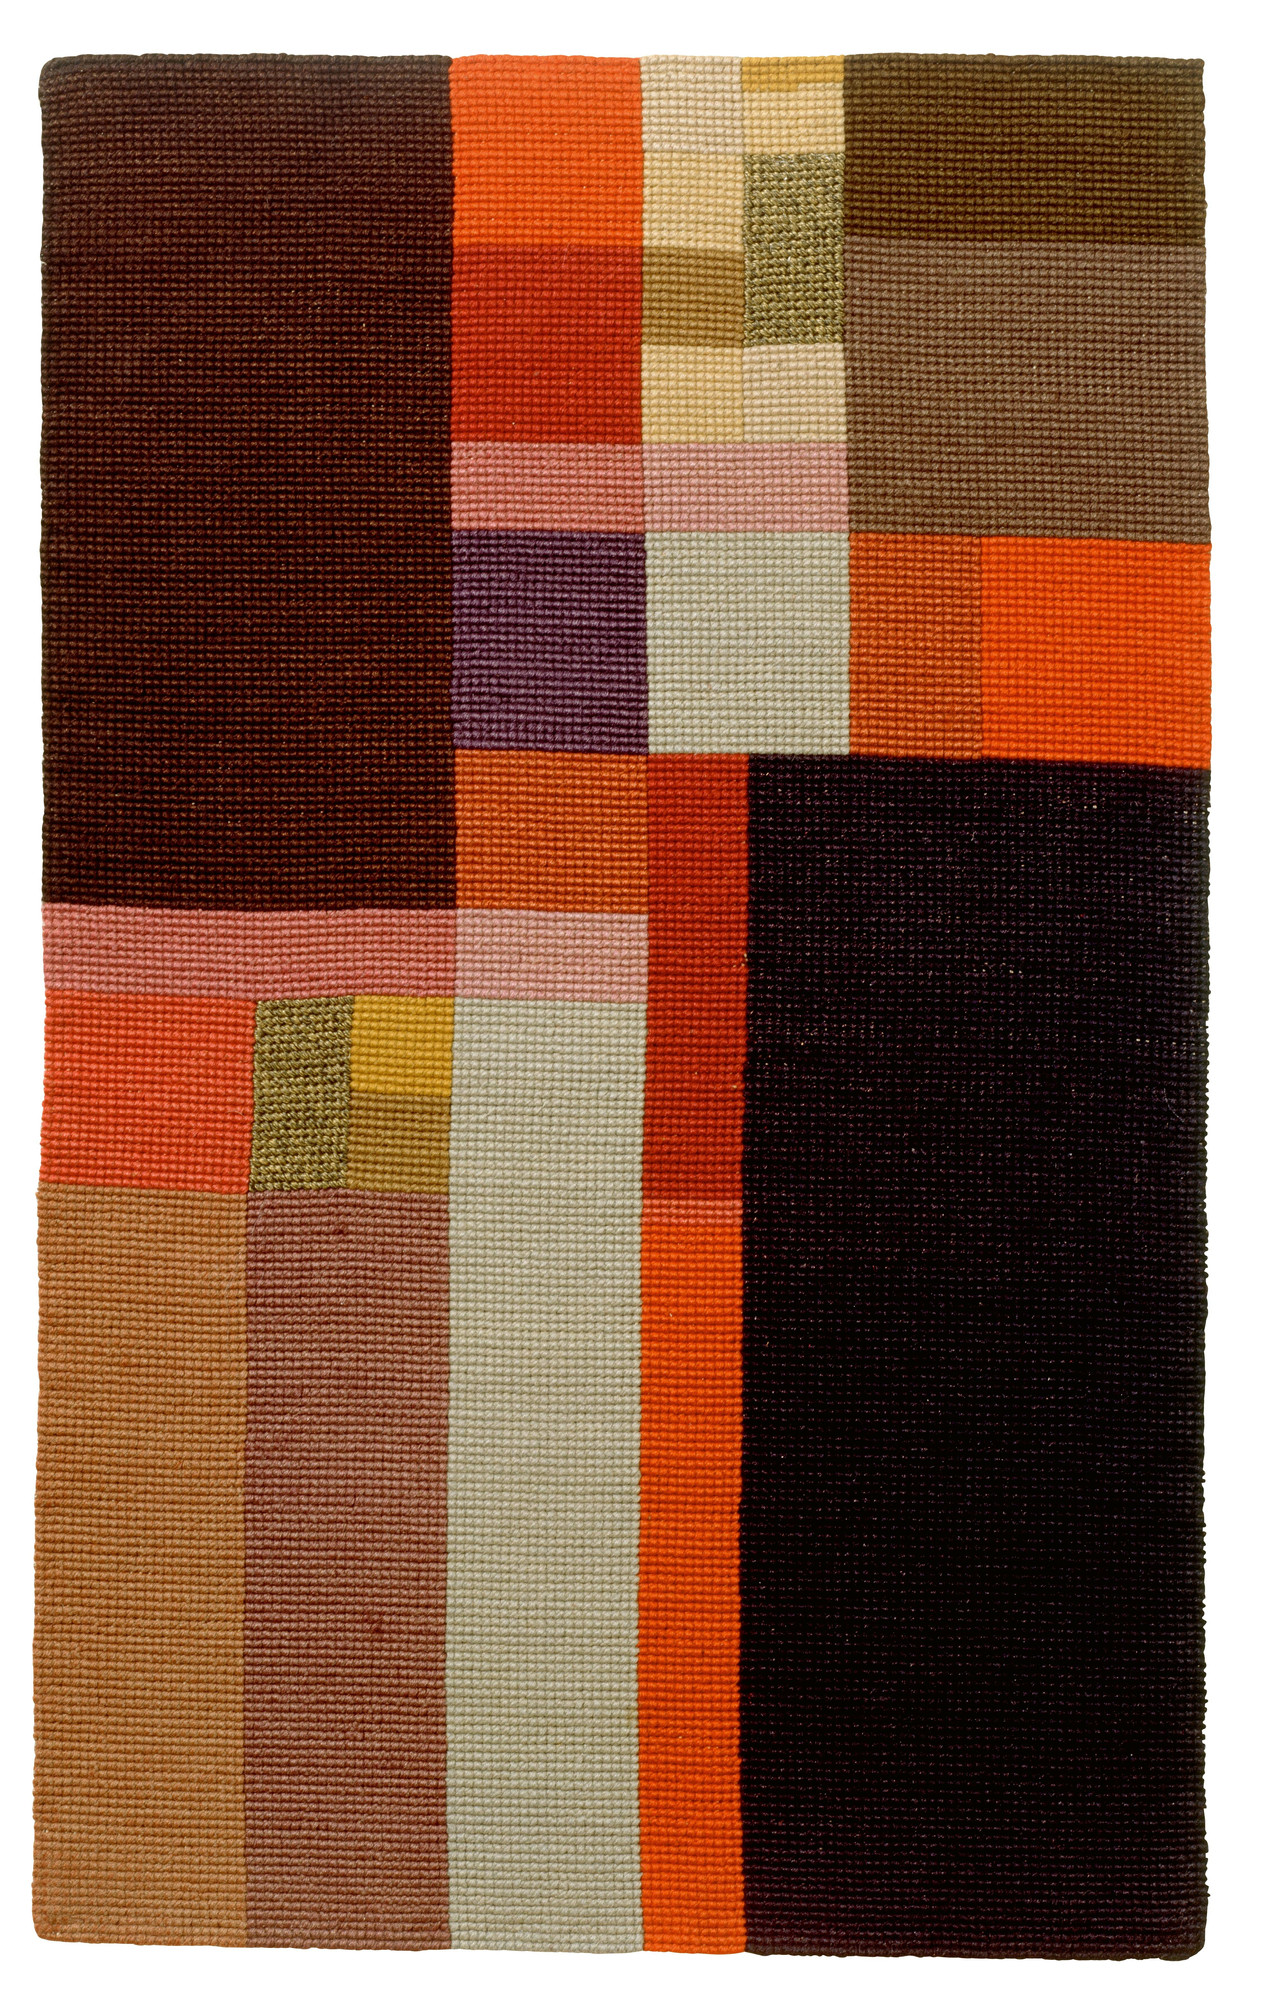 Sophie Taeuber-Arp. *Vertical-Horizontal Composition*. c. 1917. Wool on canvas. 18 7/8 x 11 5/8" (48 x 29.5 cm). Private collection, on long-term loan to the Aargauer Kunsthaus Aarau, Switzerland. Courtesy Aargauer Kunsthaus Aarau, photo Peter Schälchli.